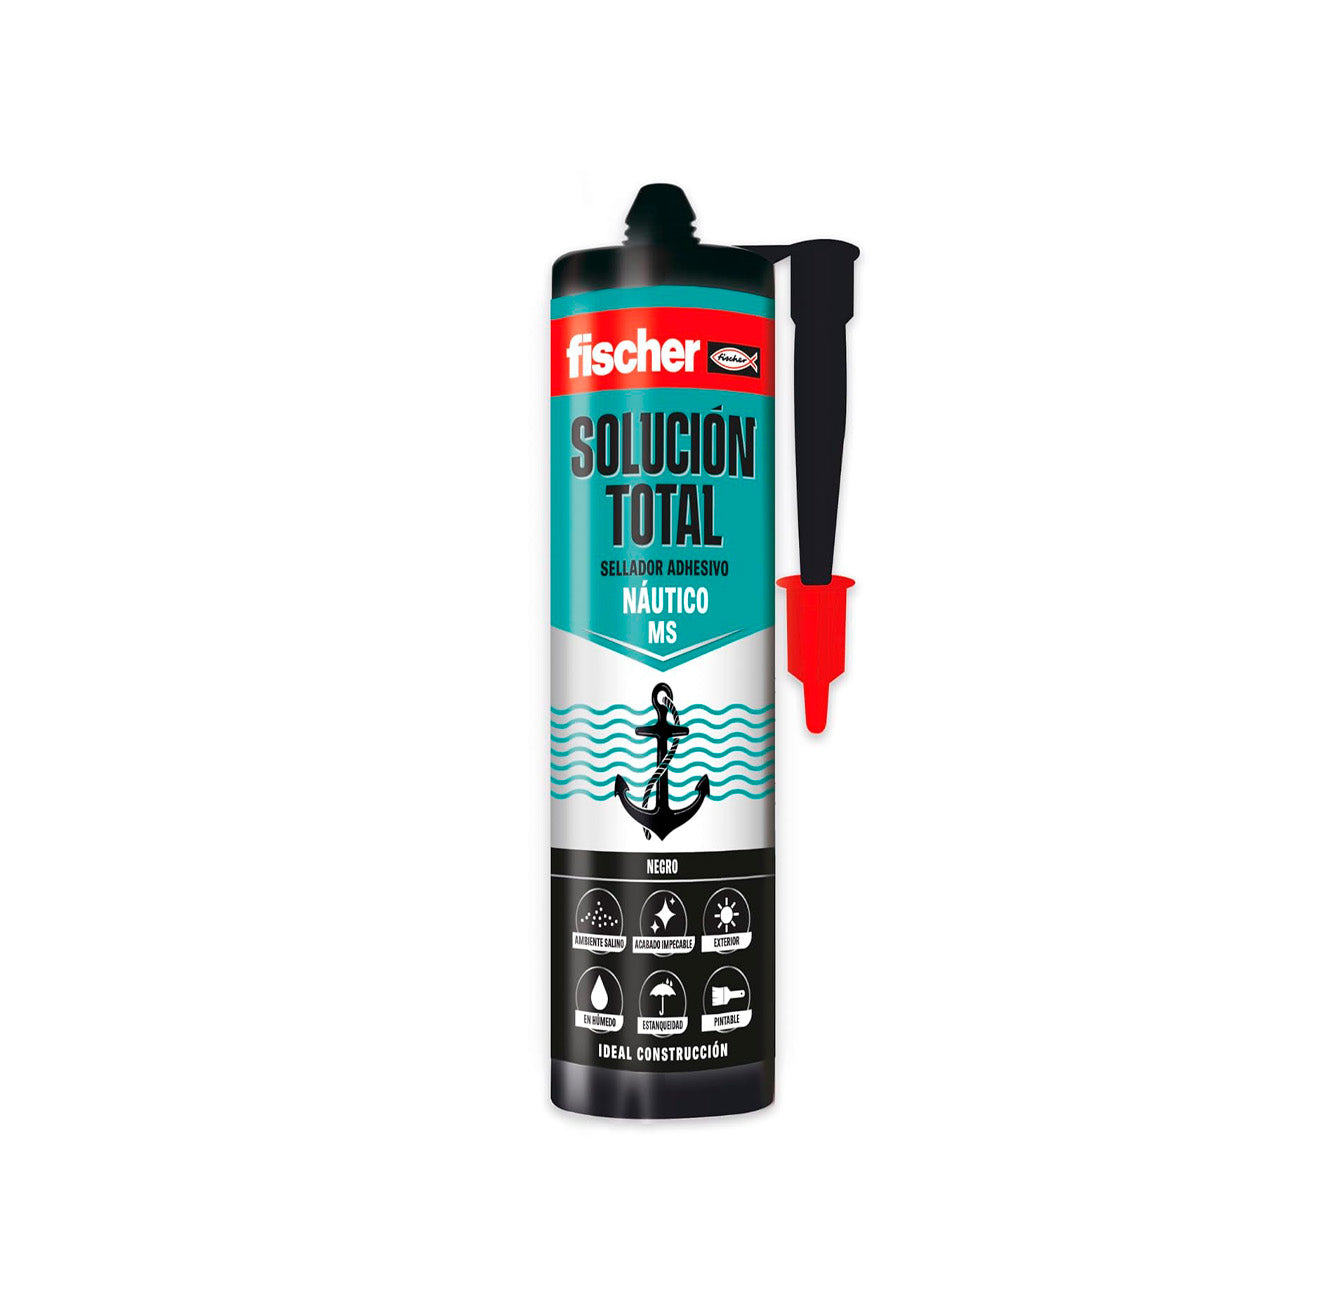 Sealant Adhesive Cartridge 290ml Fischer MS Special Nautical